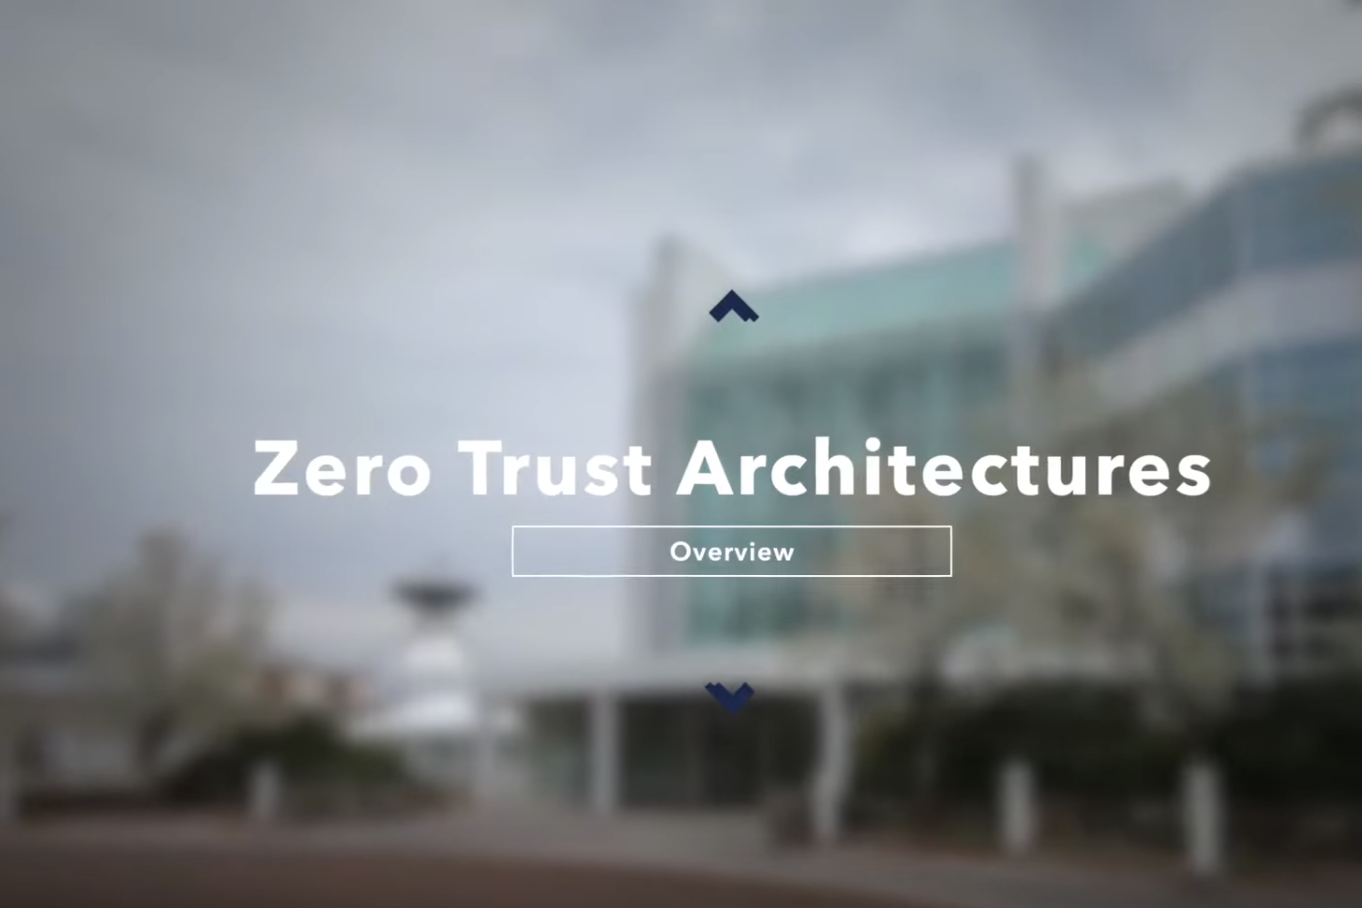 mit.edu - Zero-trust architecture may hold the answer to cybersecurity insider threats